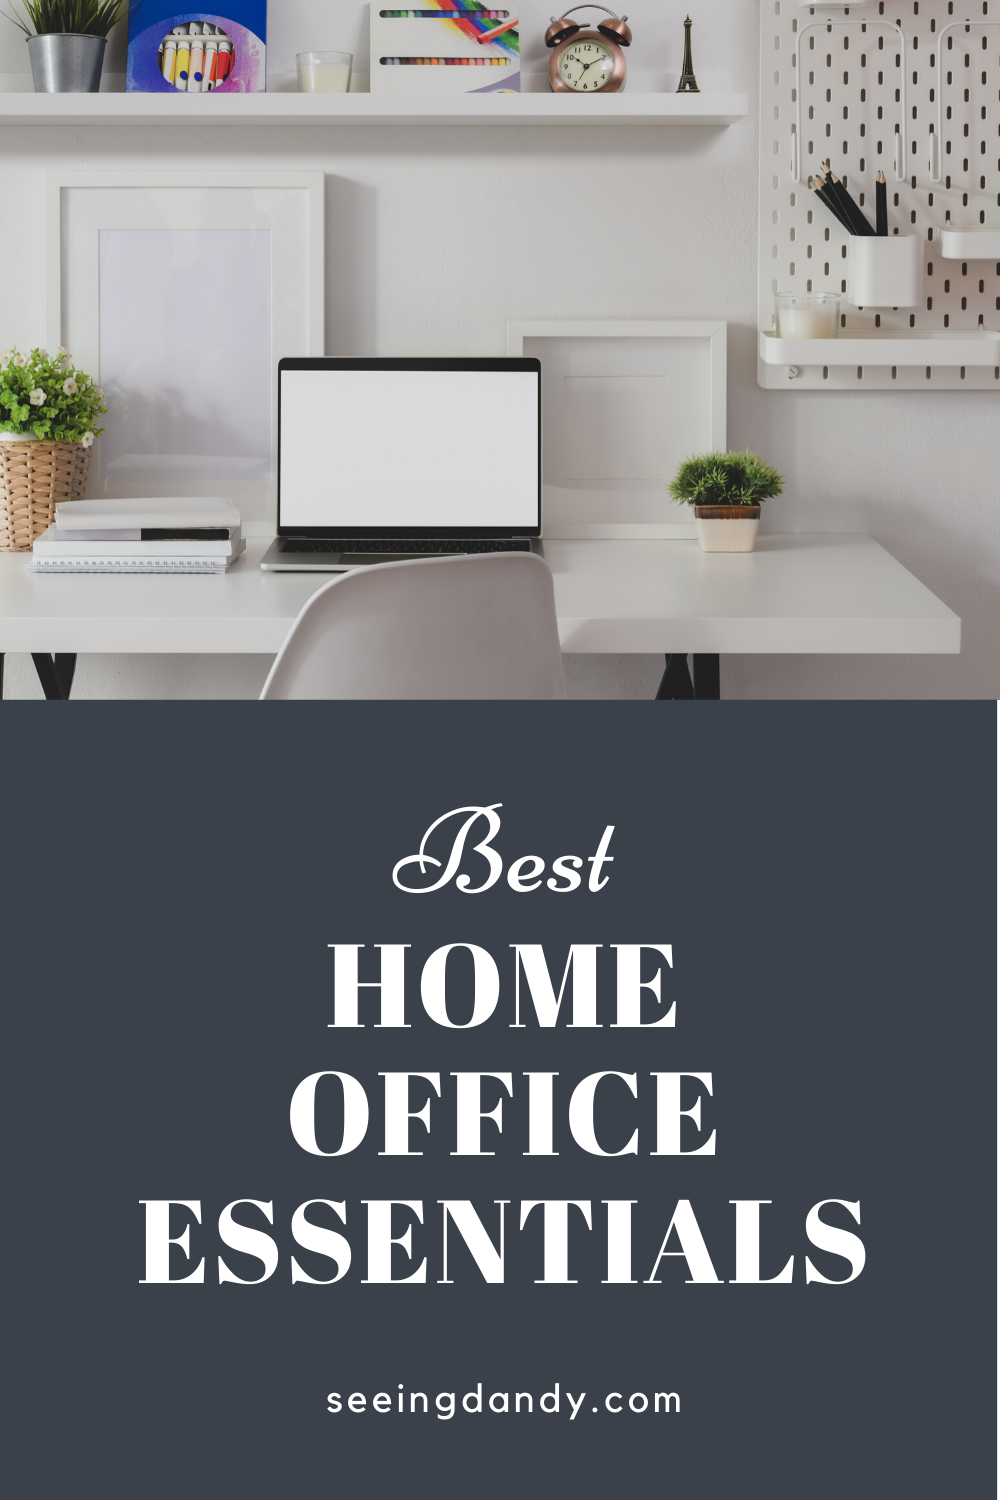 Best home office essentials for updating work at home workspace 